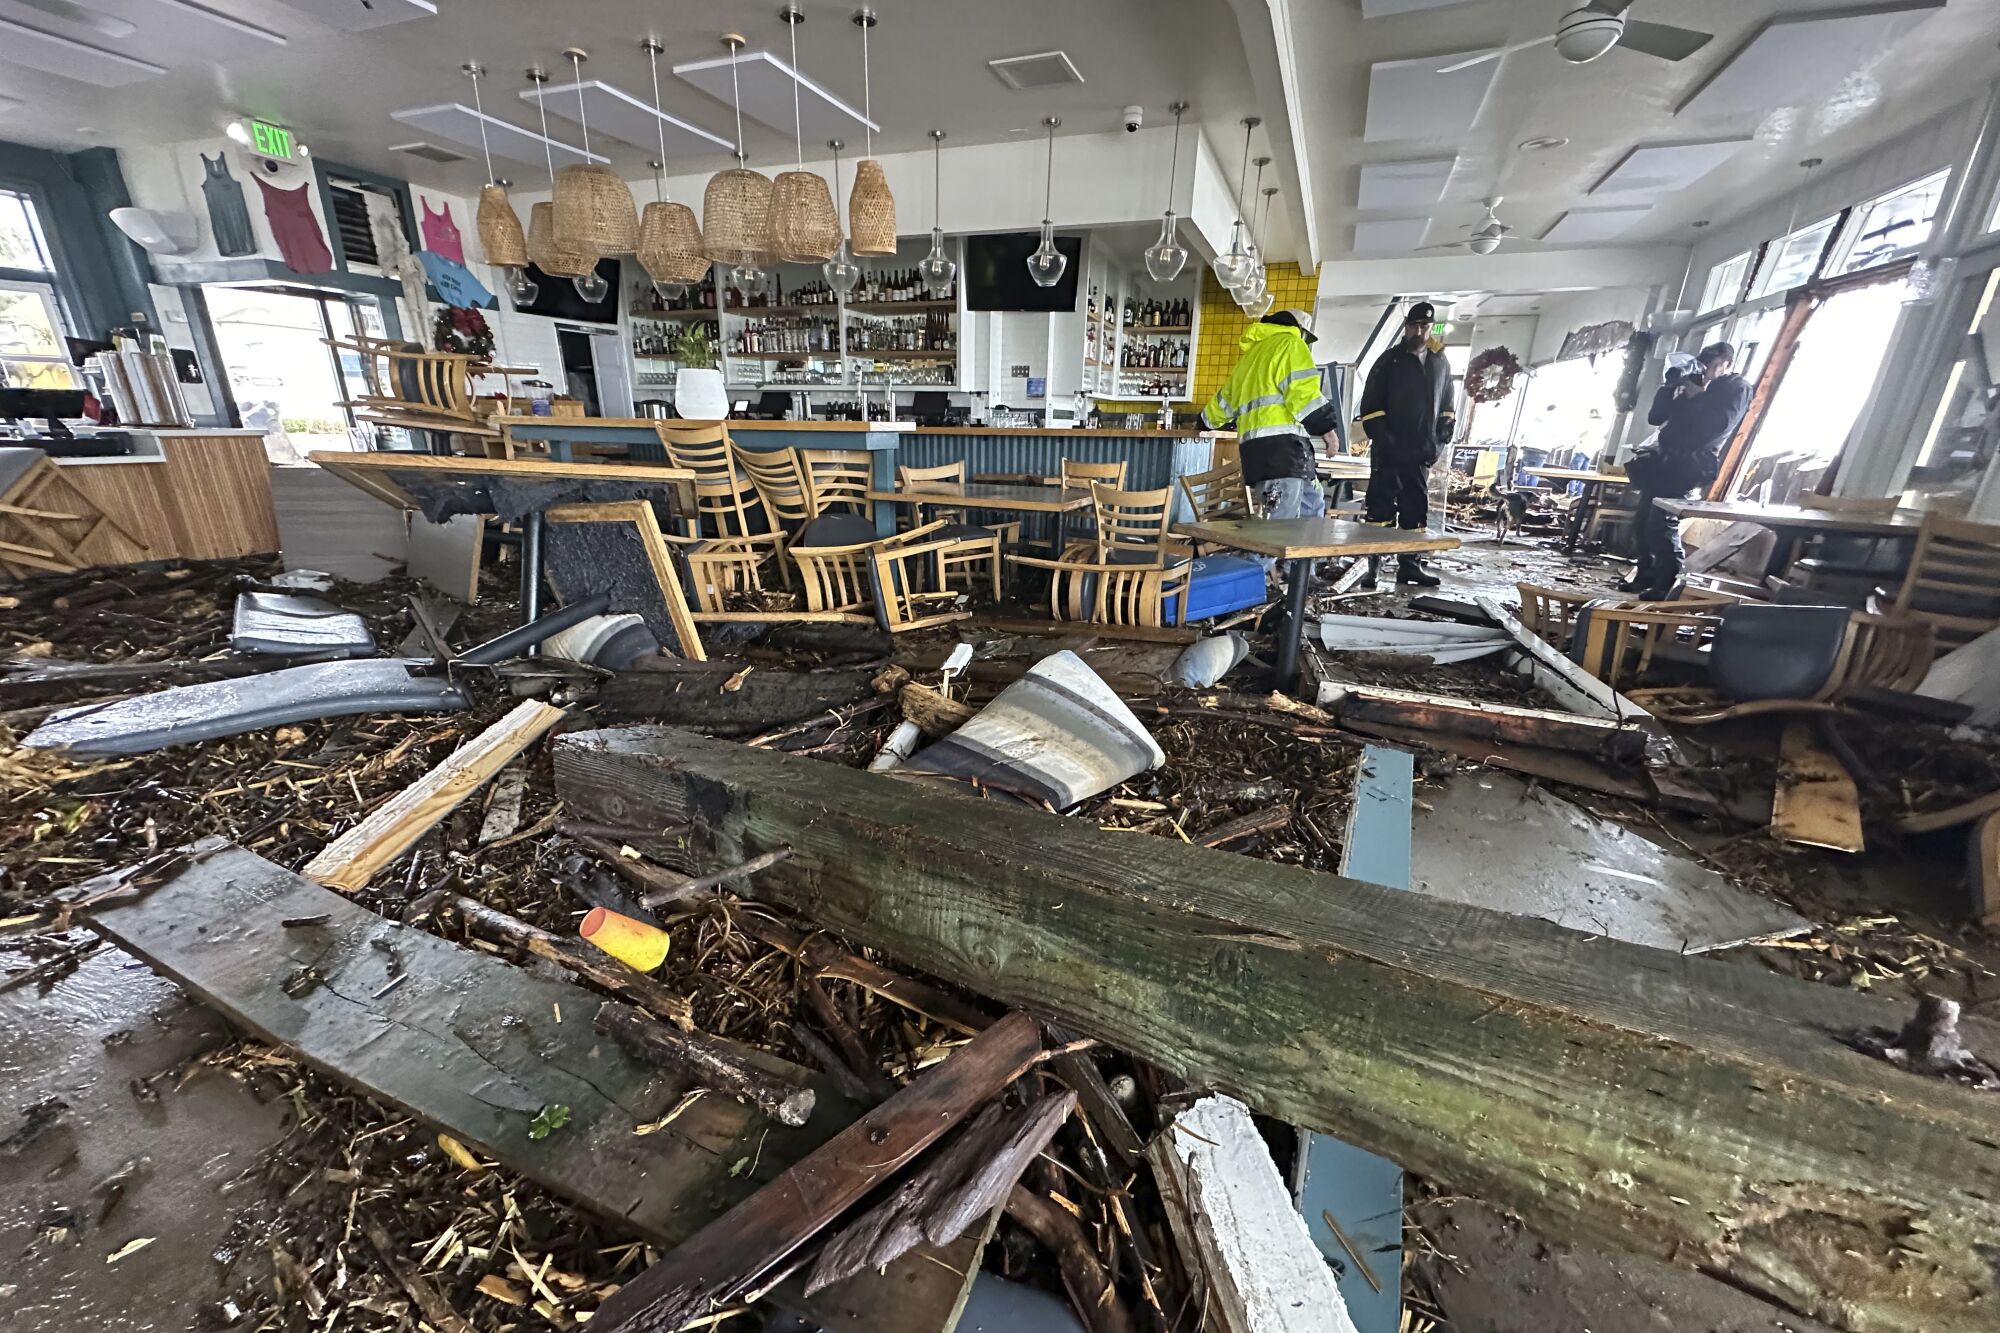 The interior of the restaurant was completely destroyed by the storm 